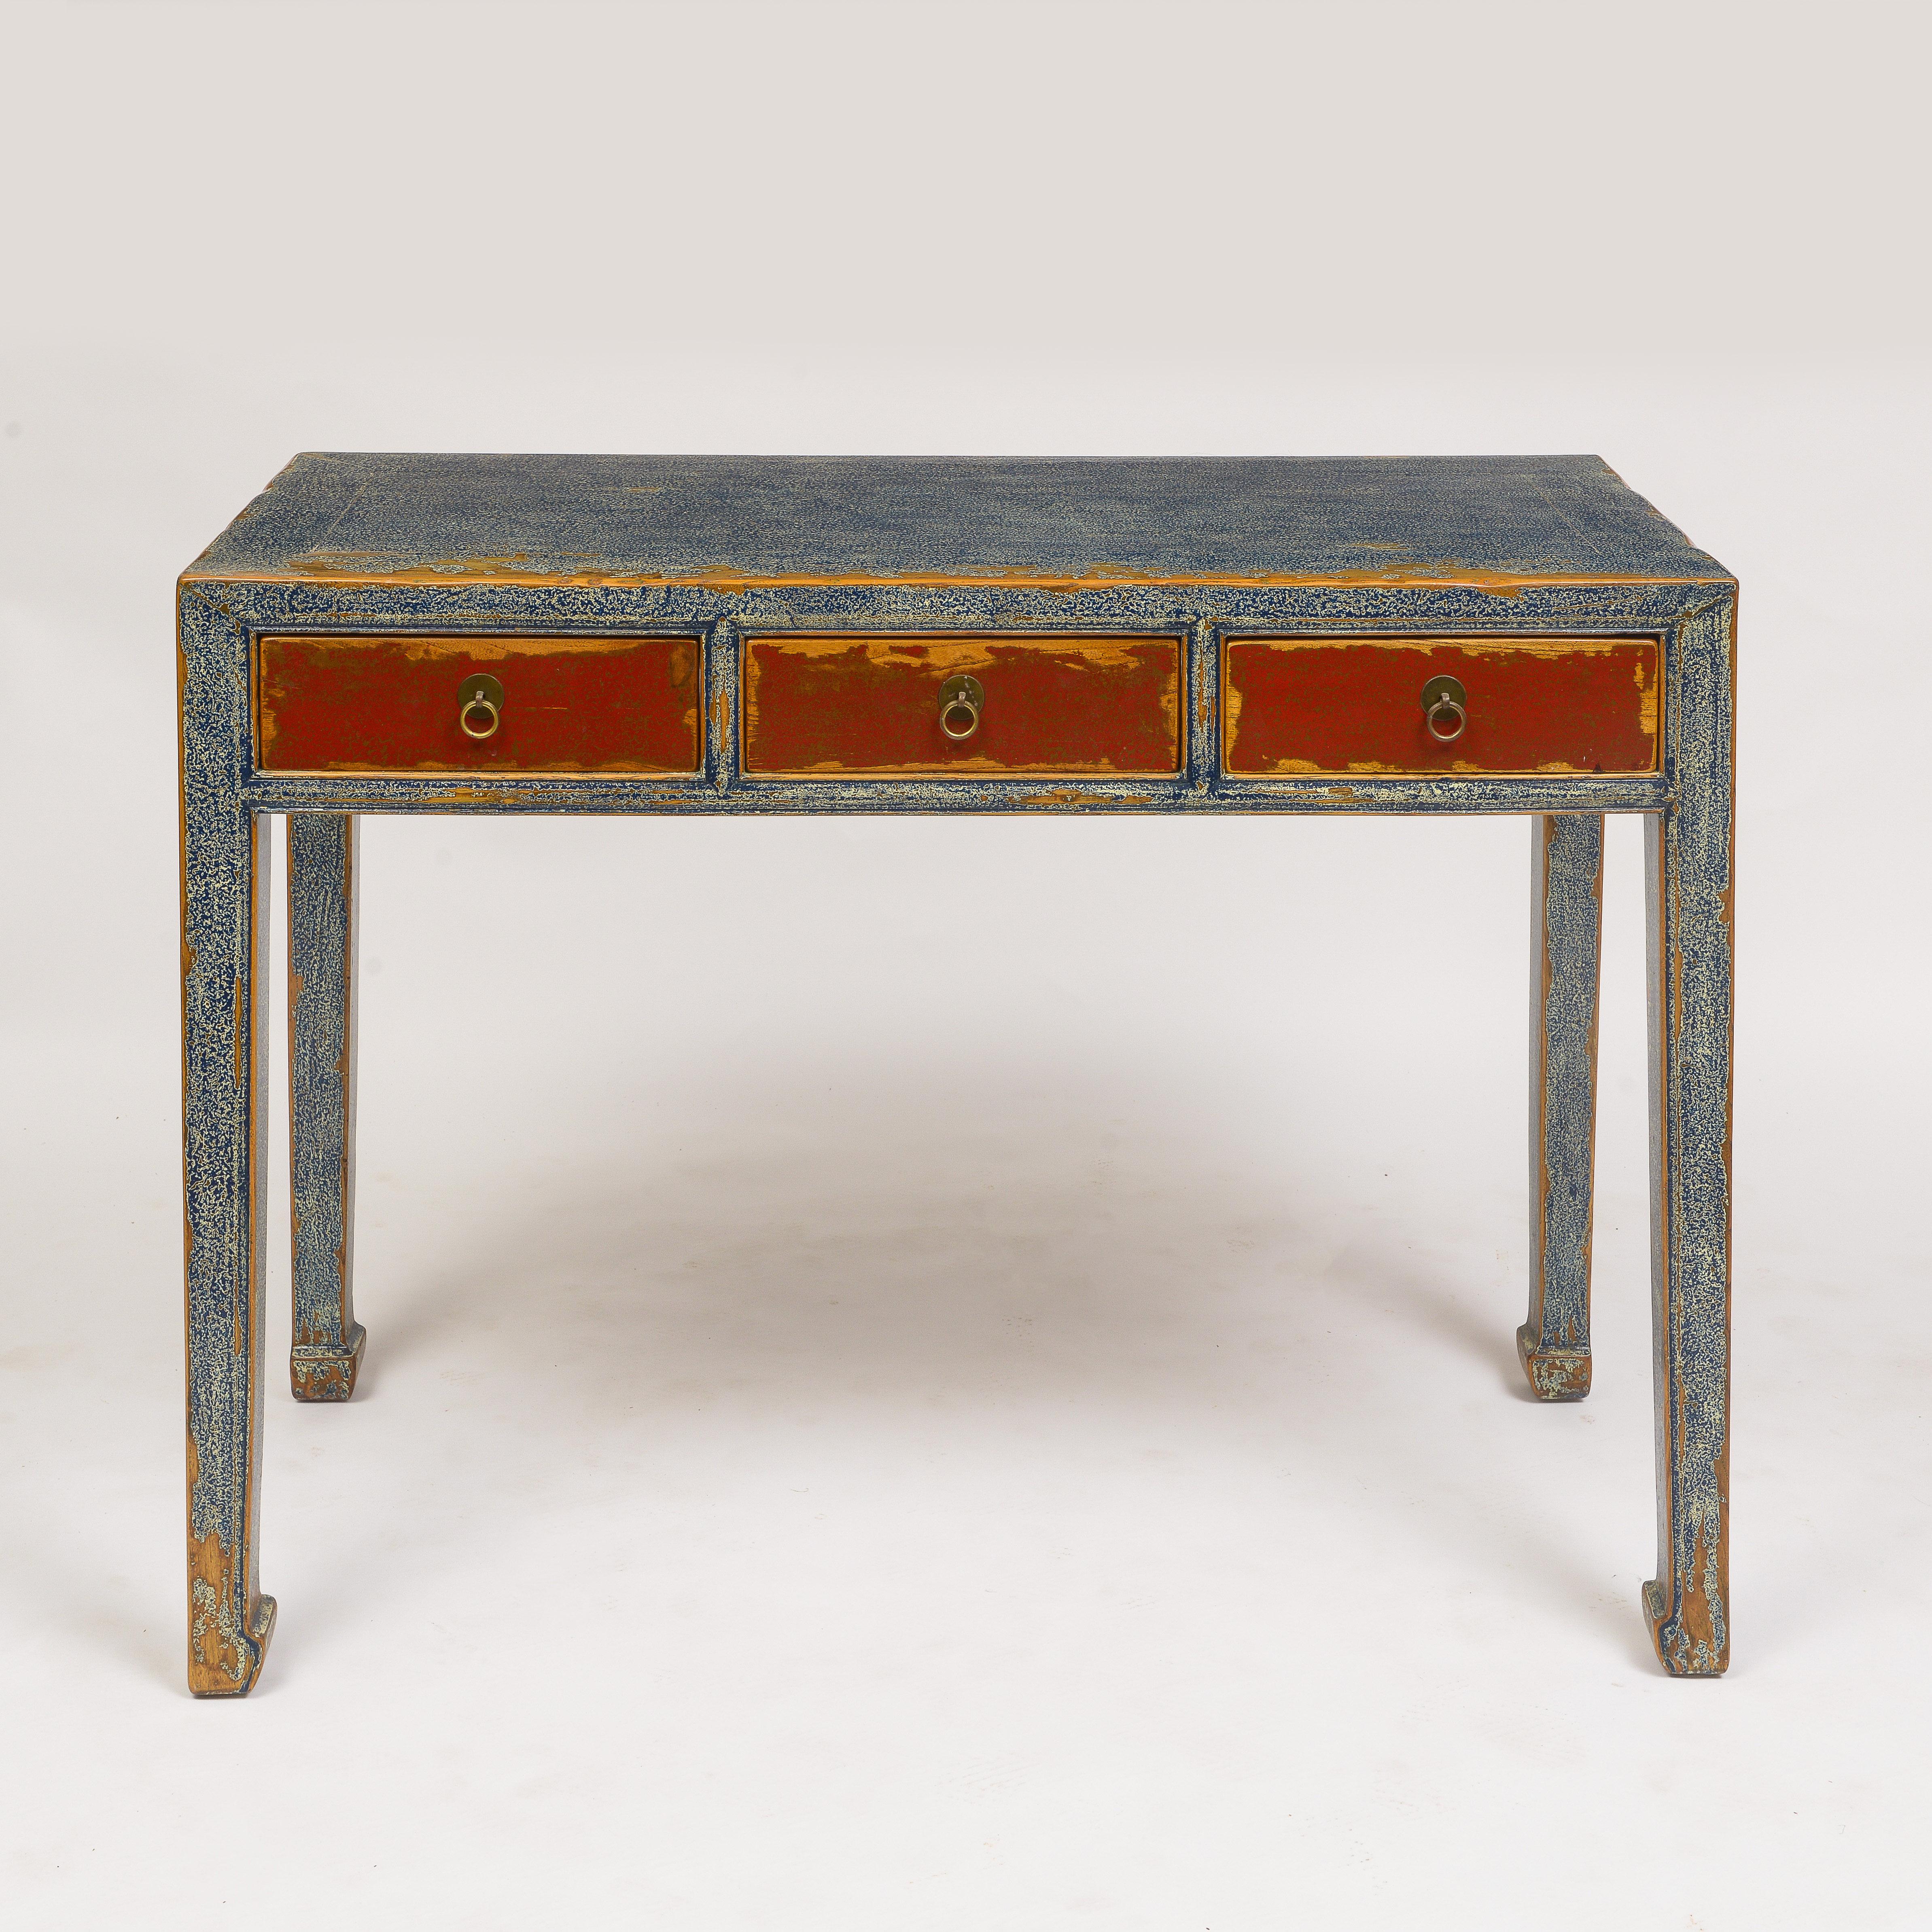 19th century Chinese console made of Jumu wood (southern elm)
Painted and marbleized paper covered Console
Three red drawers with brass hardware
Purposeful distressed finish.